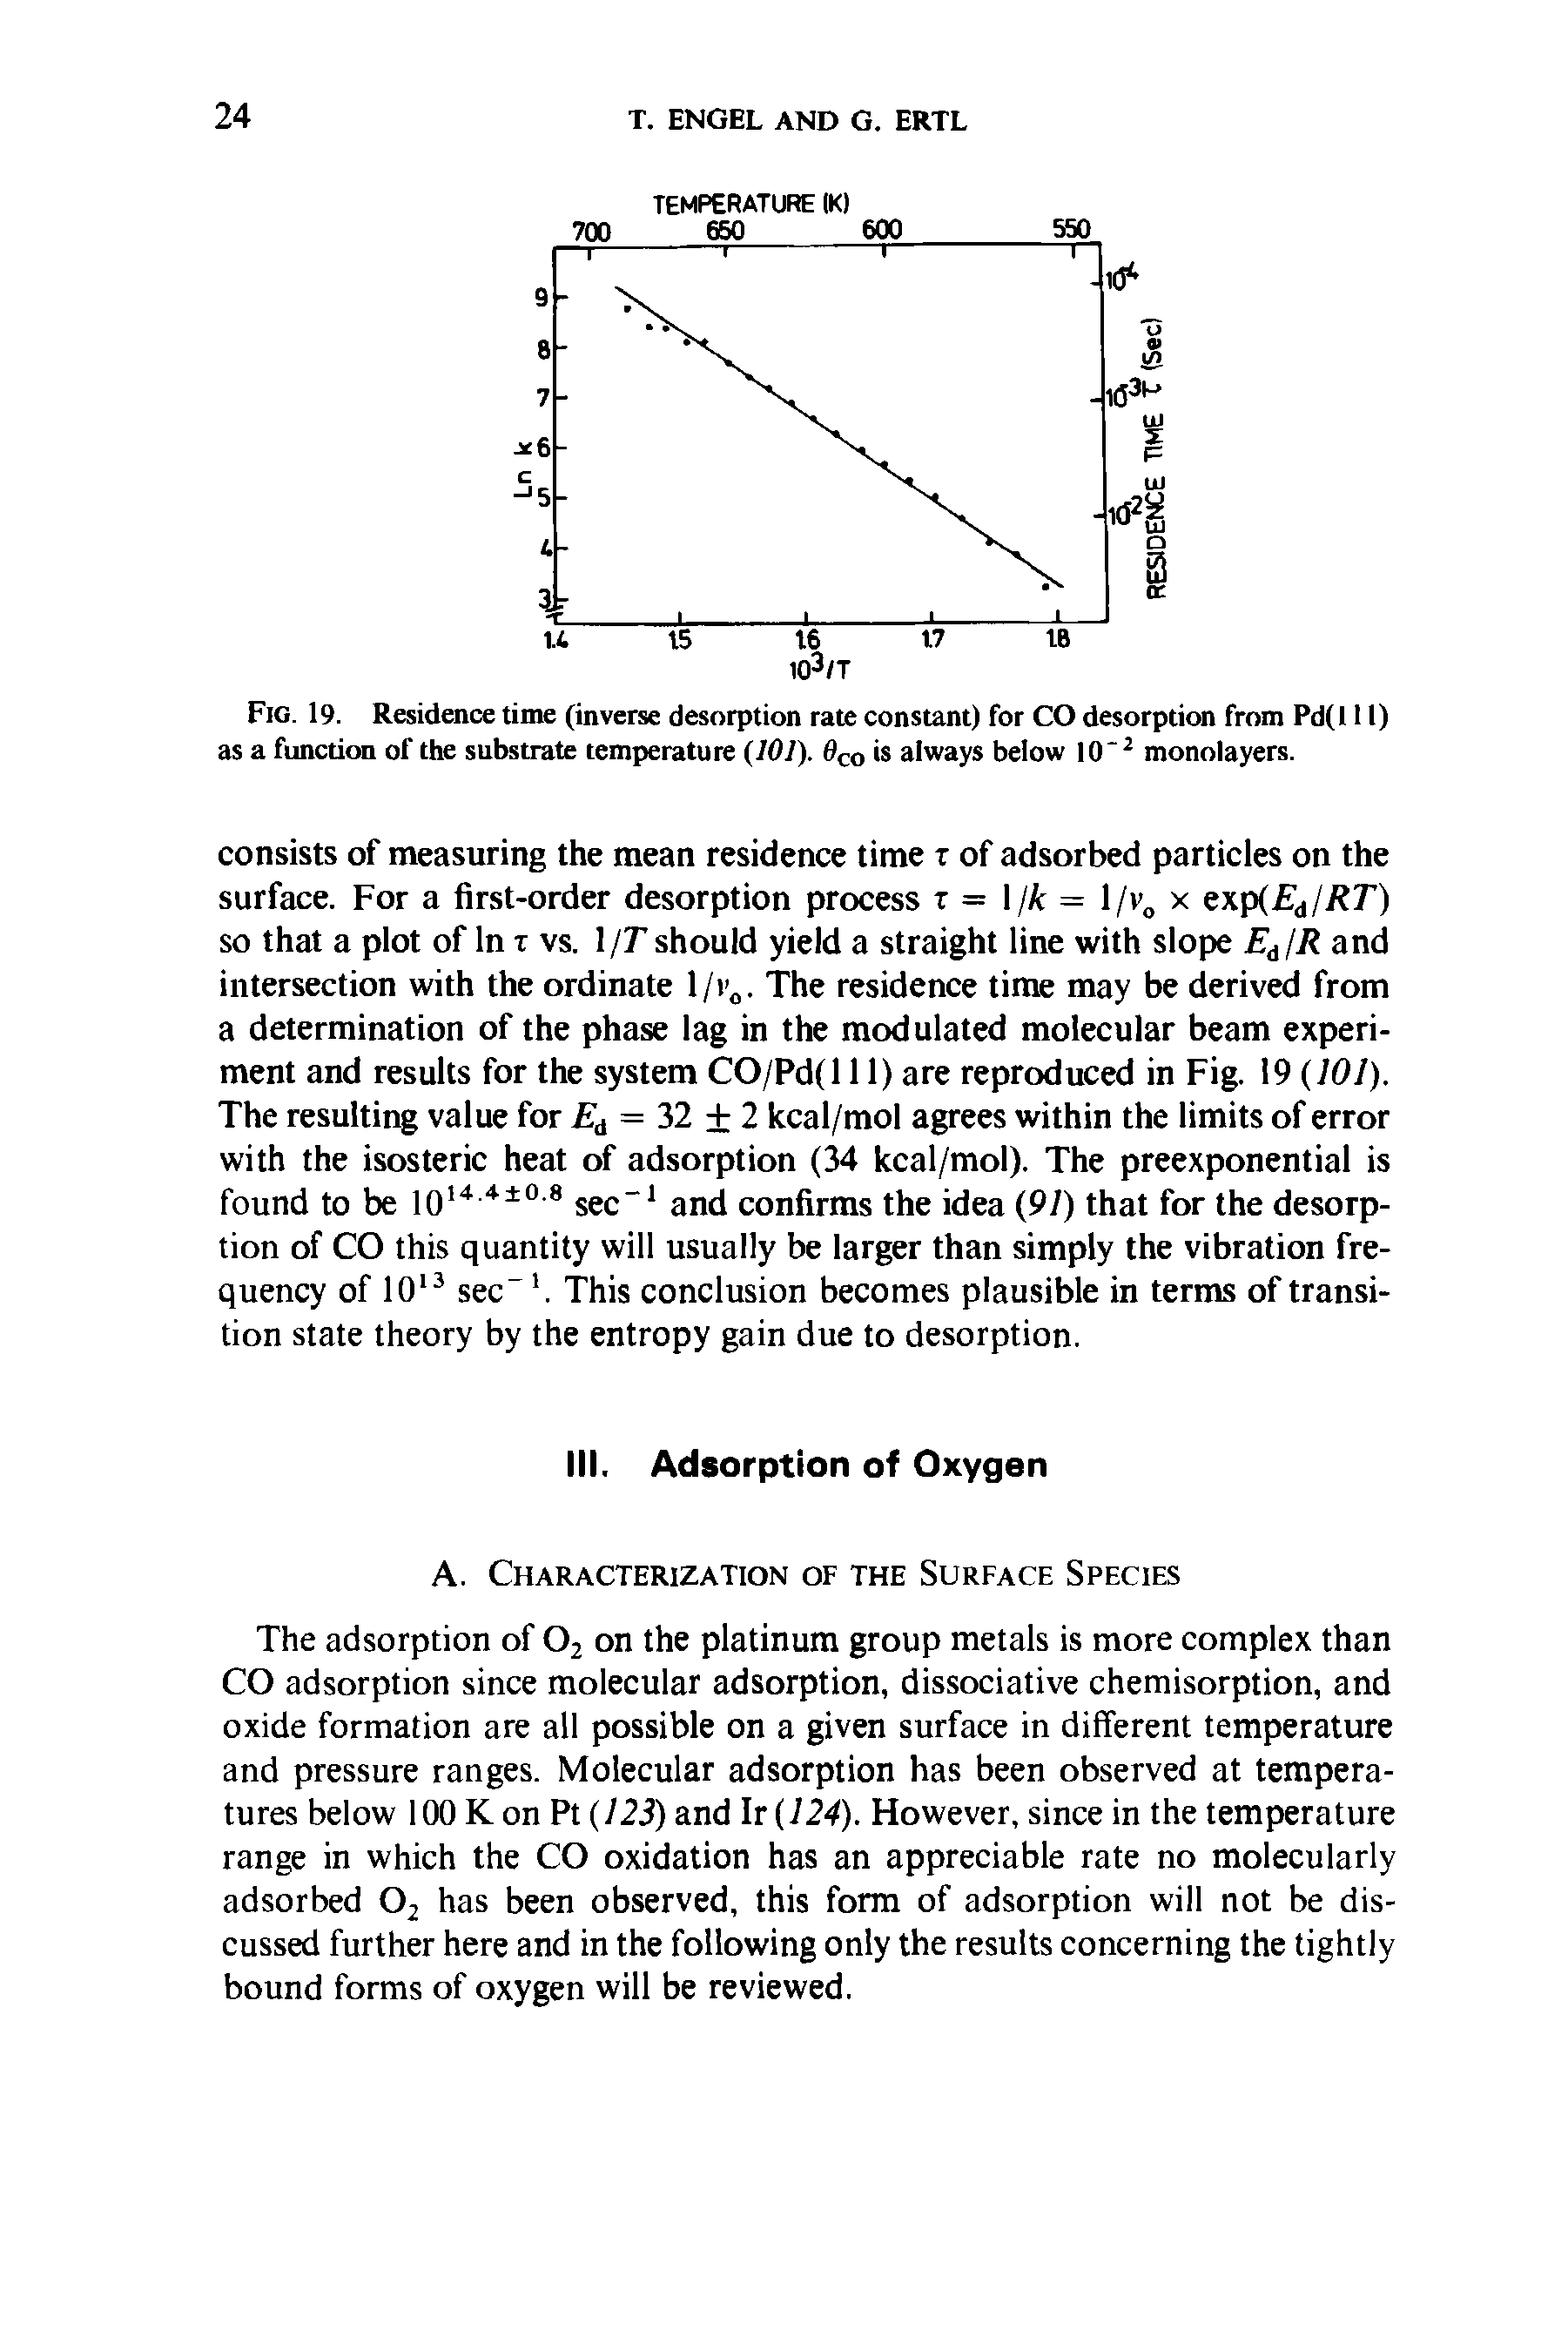 Fig. 19. Residence time (inverse desorption rate constant) for CO desorption from Pd(l 11) as a function of the substrate temperature (101). 6co is always below 10 2 monolayers.